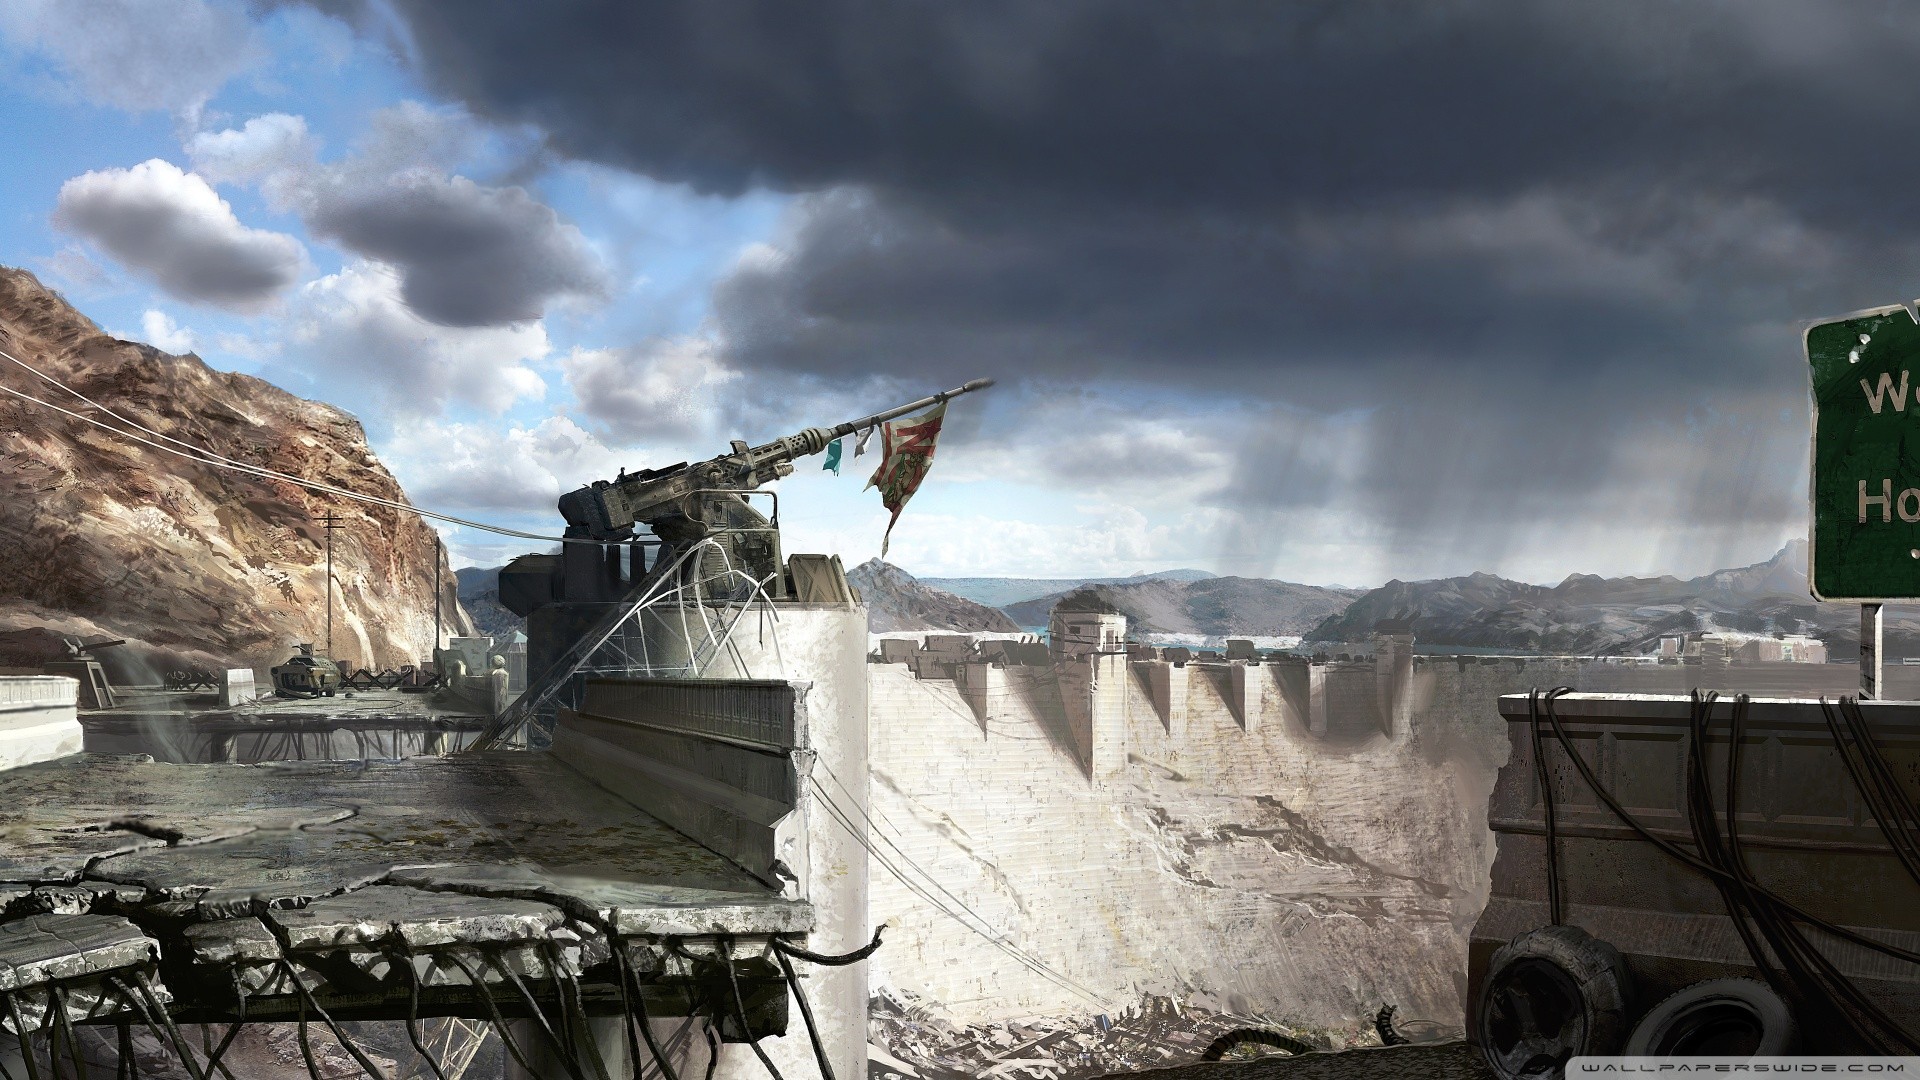 General 1920x1080 apocalyptic Fallout: New Vegas artwork video games Fallout PC gaming Hoover Dam science fiction